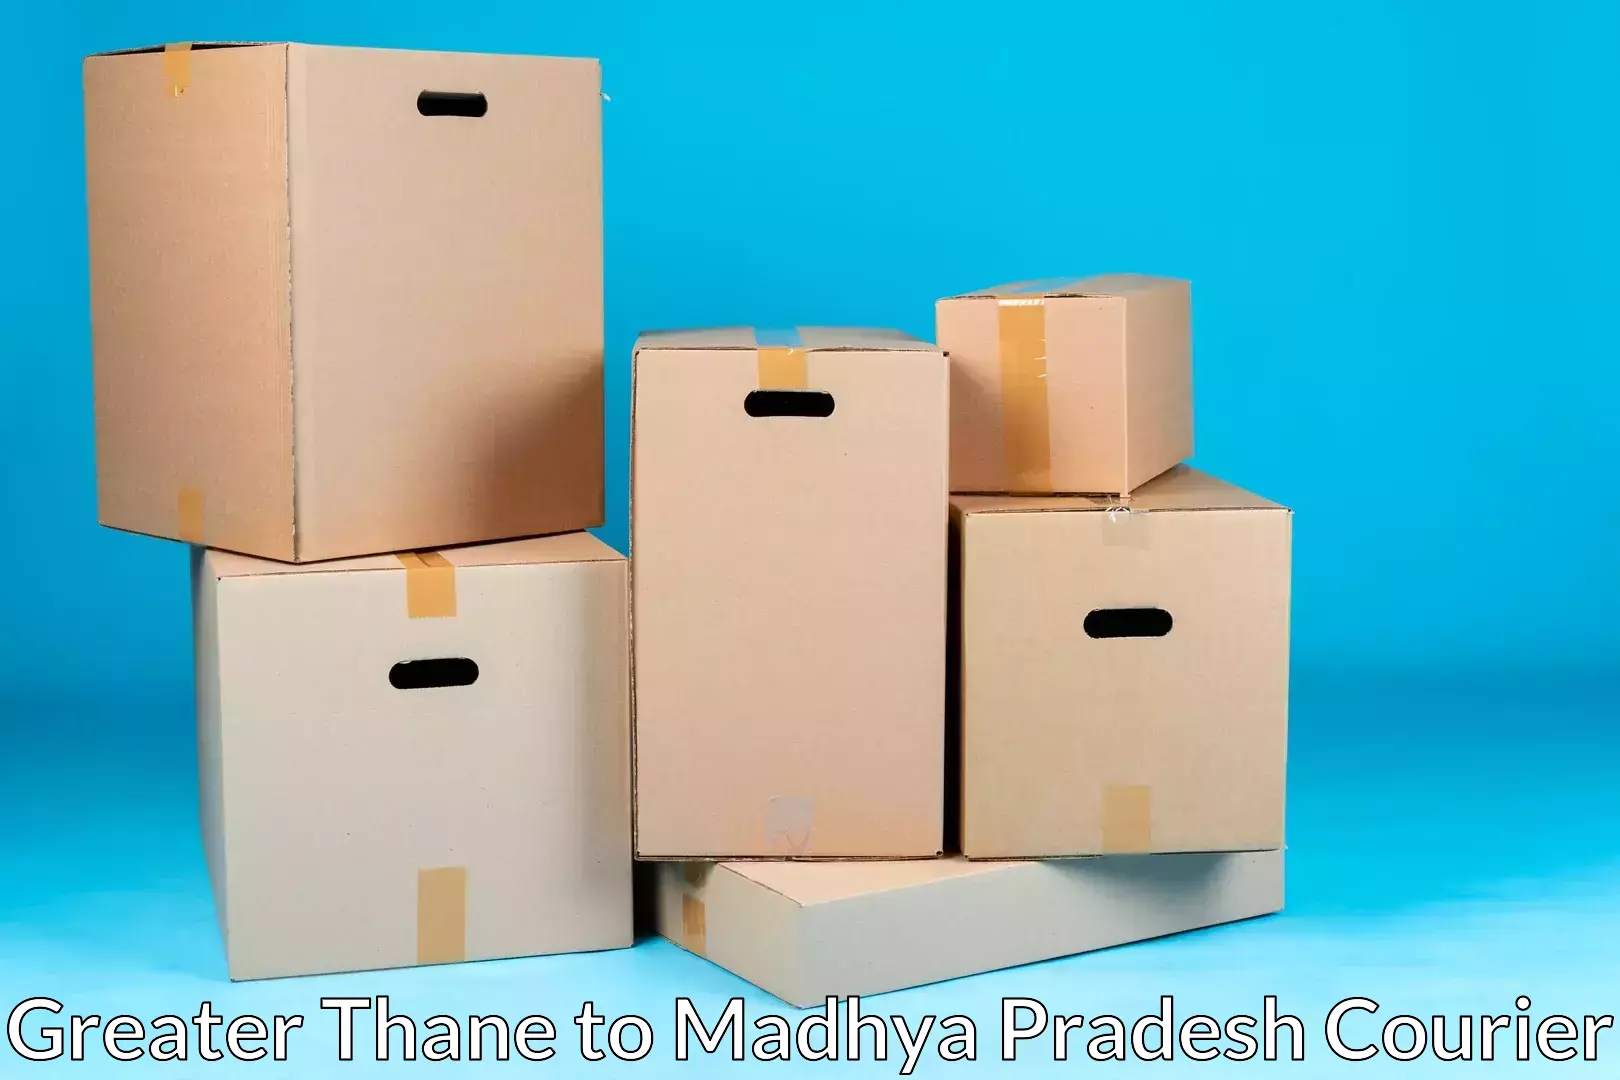 Furniture relocation experts Greater Thane to Alirajpur